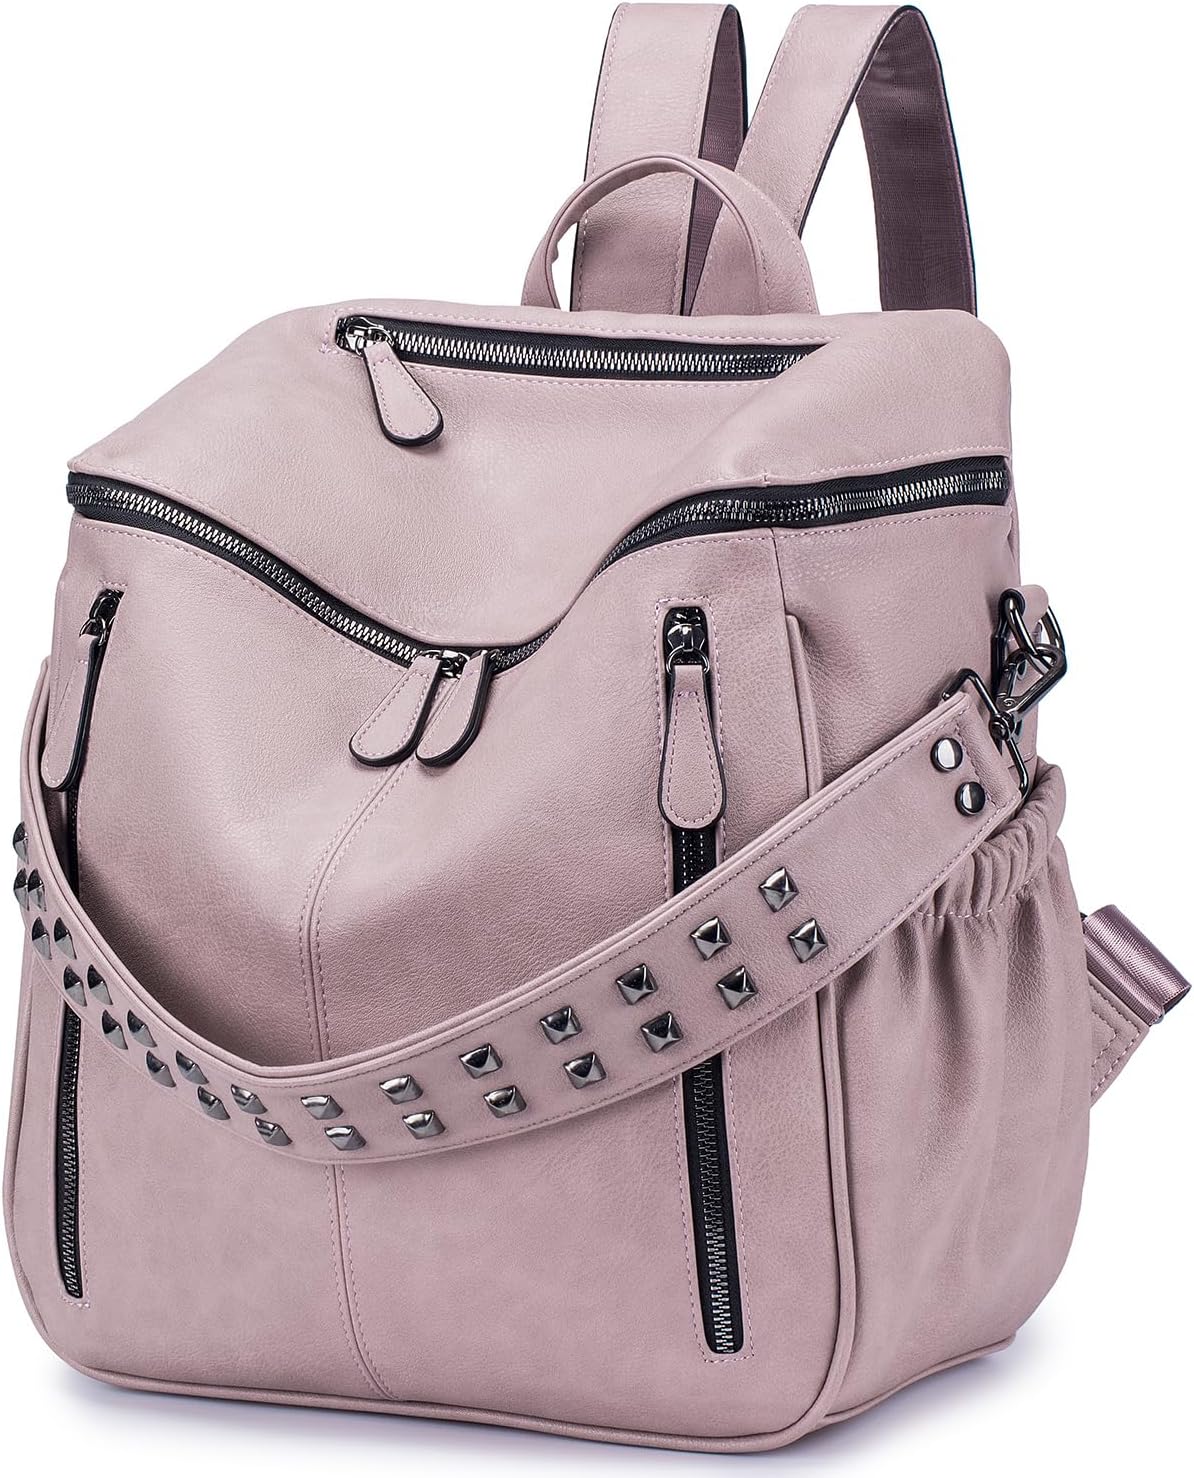 Ive been through a ton of purses and bags.. and hands down this is the best bag Ive EVER HAD🤩 not only is it gorgeous but its so spacious!! You could literally fit soooo much in this bag. I love it! Being a mom of 2 little ones it definitely comes in handy! I got tired of purses cause it weighed down my shoulder and was starting to hurt. This bag doesnt hurt my shoulders or anything! Absolutely love!!! And its great quality!